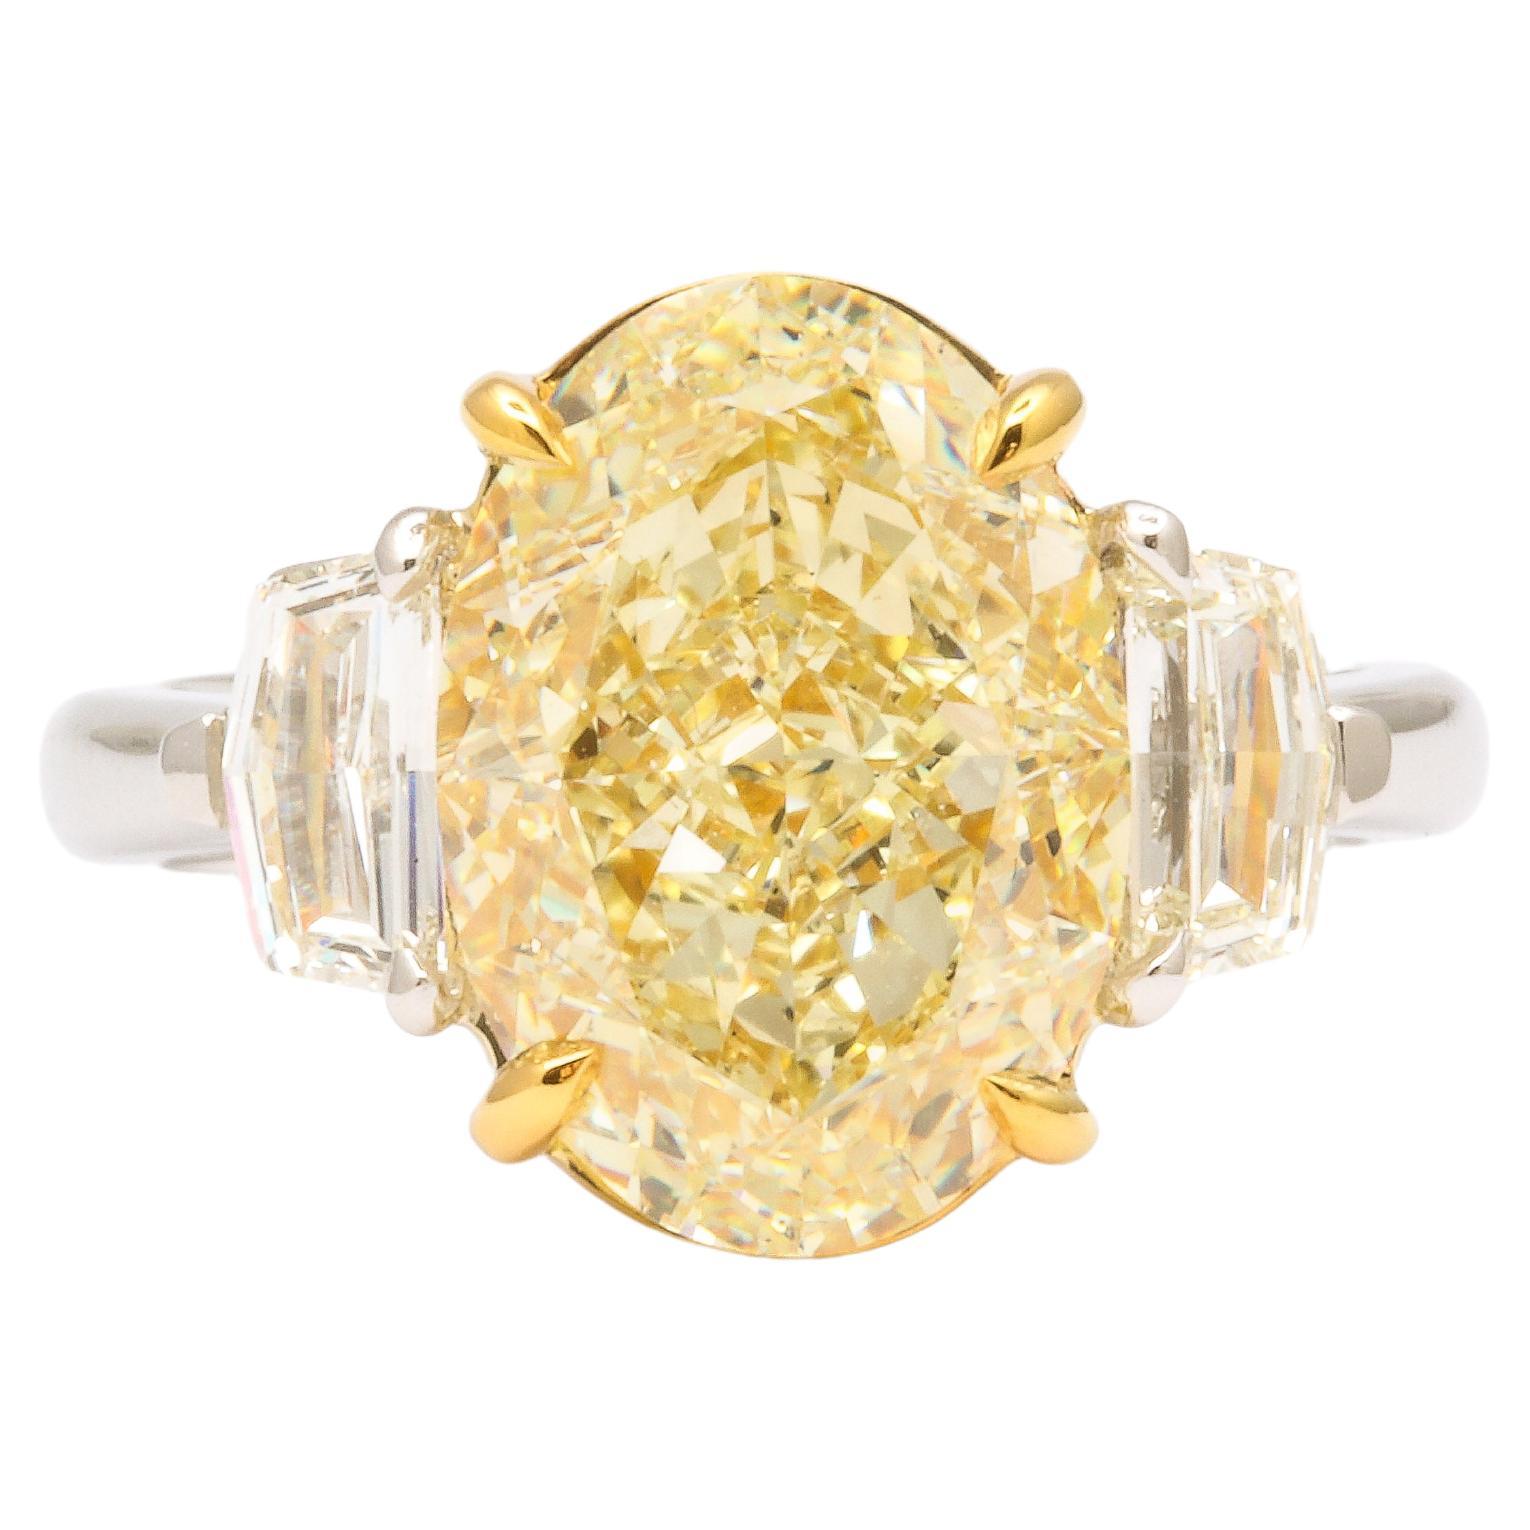 6 Carat Oval Yellow Diamond Ring Gia Certified For Sale